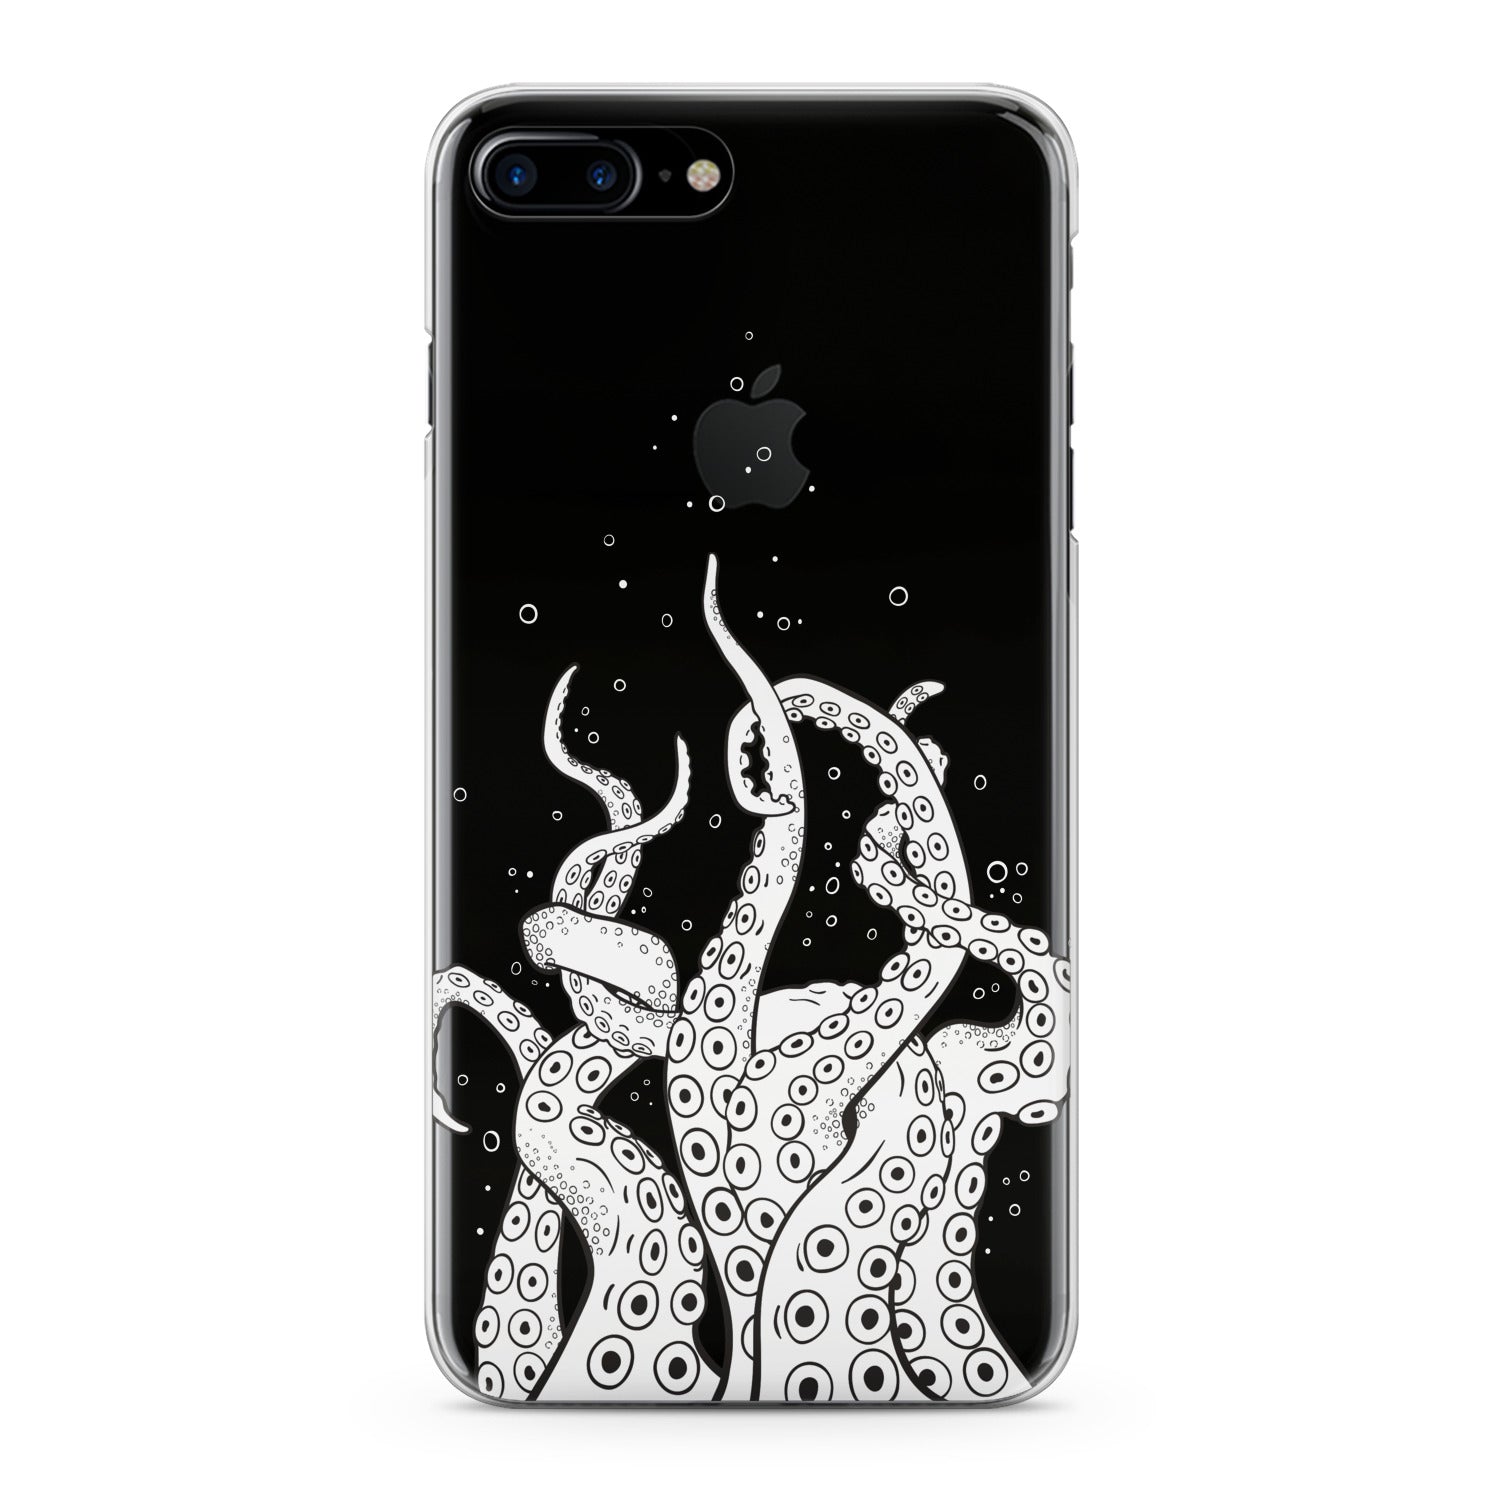 Lex Altern White Octopus Tentacles Phone Case for your iPhone & Android phone.